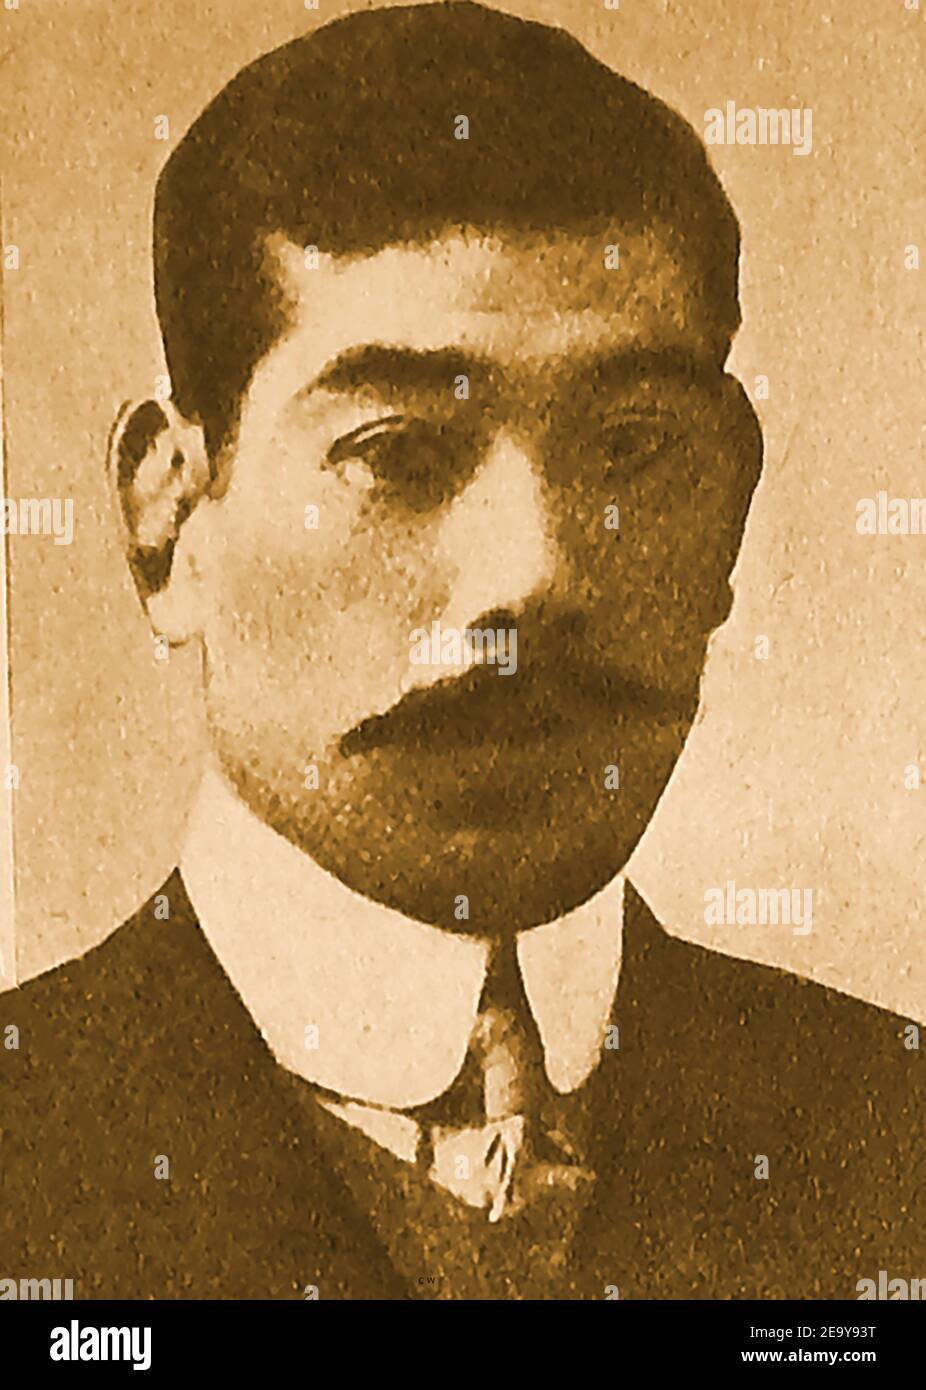 1906  portrait of Yukio Tani,(aka   谷 幸雄, Tani Yukio, 1881 –  1950) who was a pioneer Japanese jujitsu and judo instructor as well as  a professional challenge wrestler, notable for being one of the first jujutsu stylists to teach and compete outside of Japan . He was a noted wrestling expert and promoter in Britain.Tani became a professional wrestler on the British  music hall circuit challenging audience members to wrestle him. Hde also co-authored a book entitled The Game of Jujitsu Stock Photo